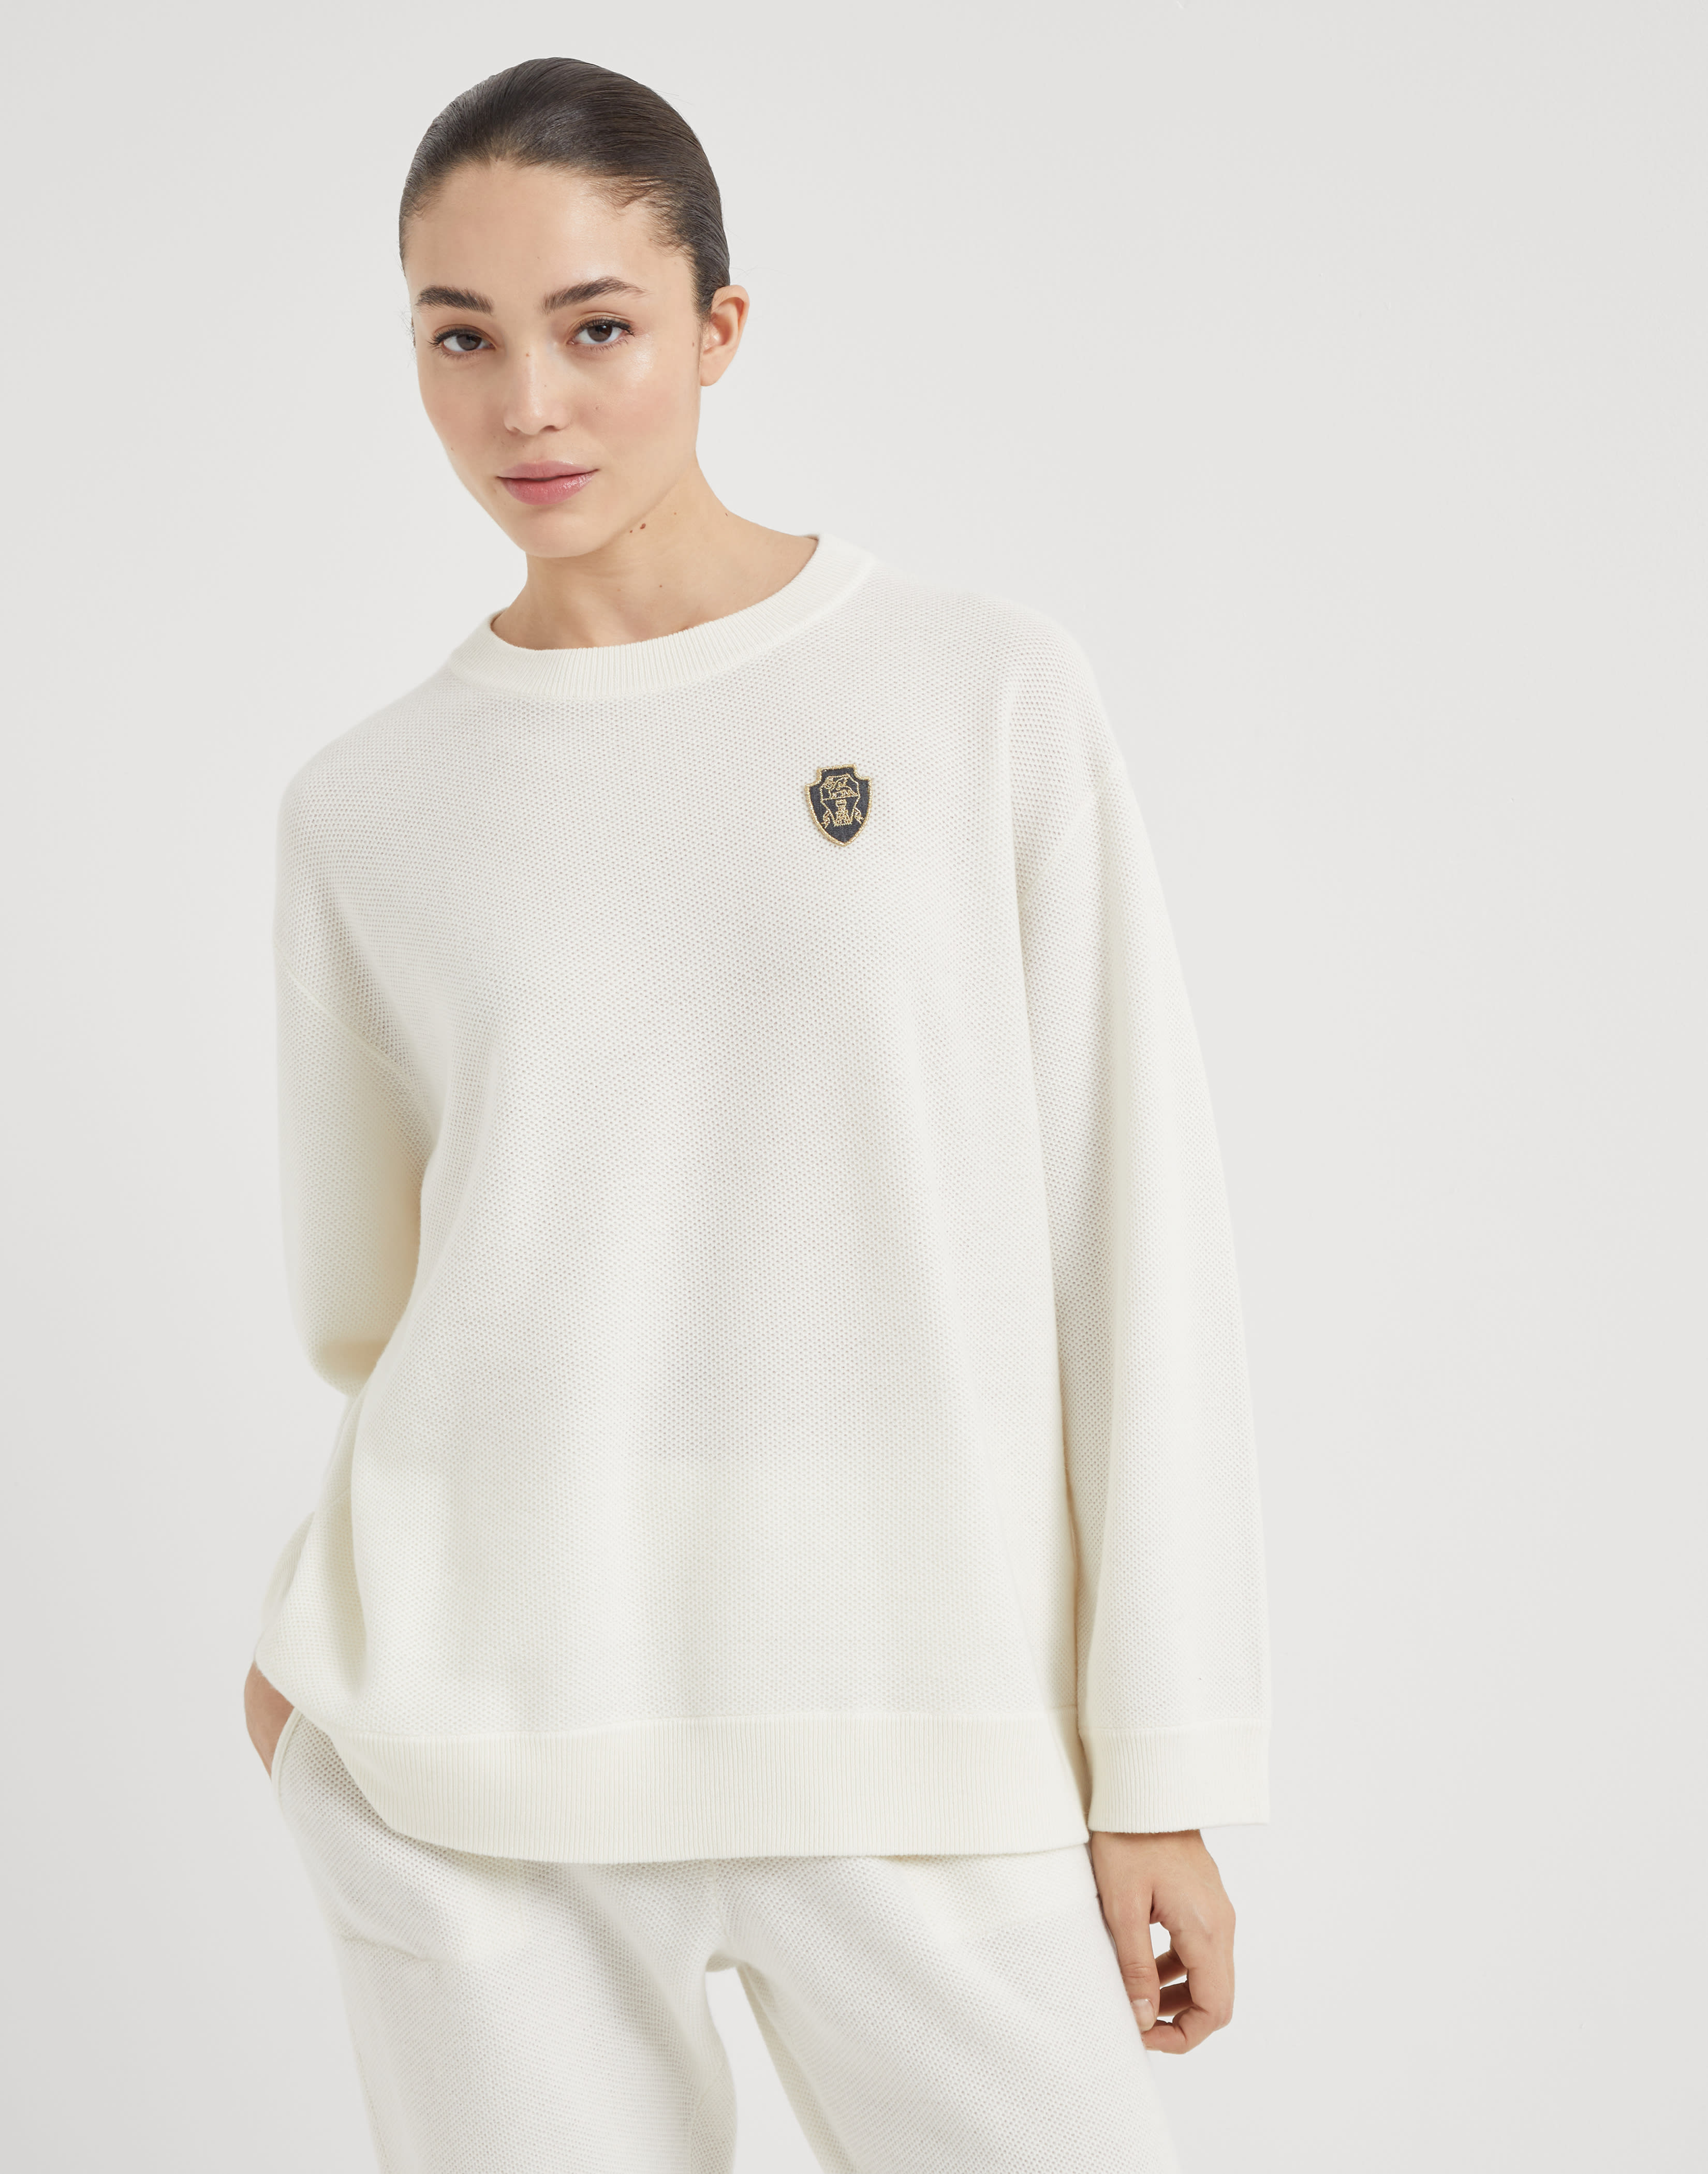 Pullover in Wabenmuster mit Logo